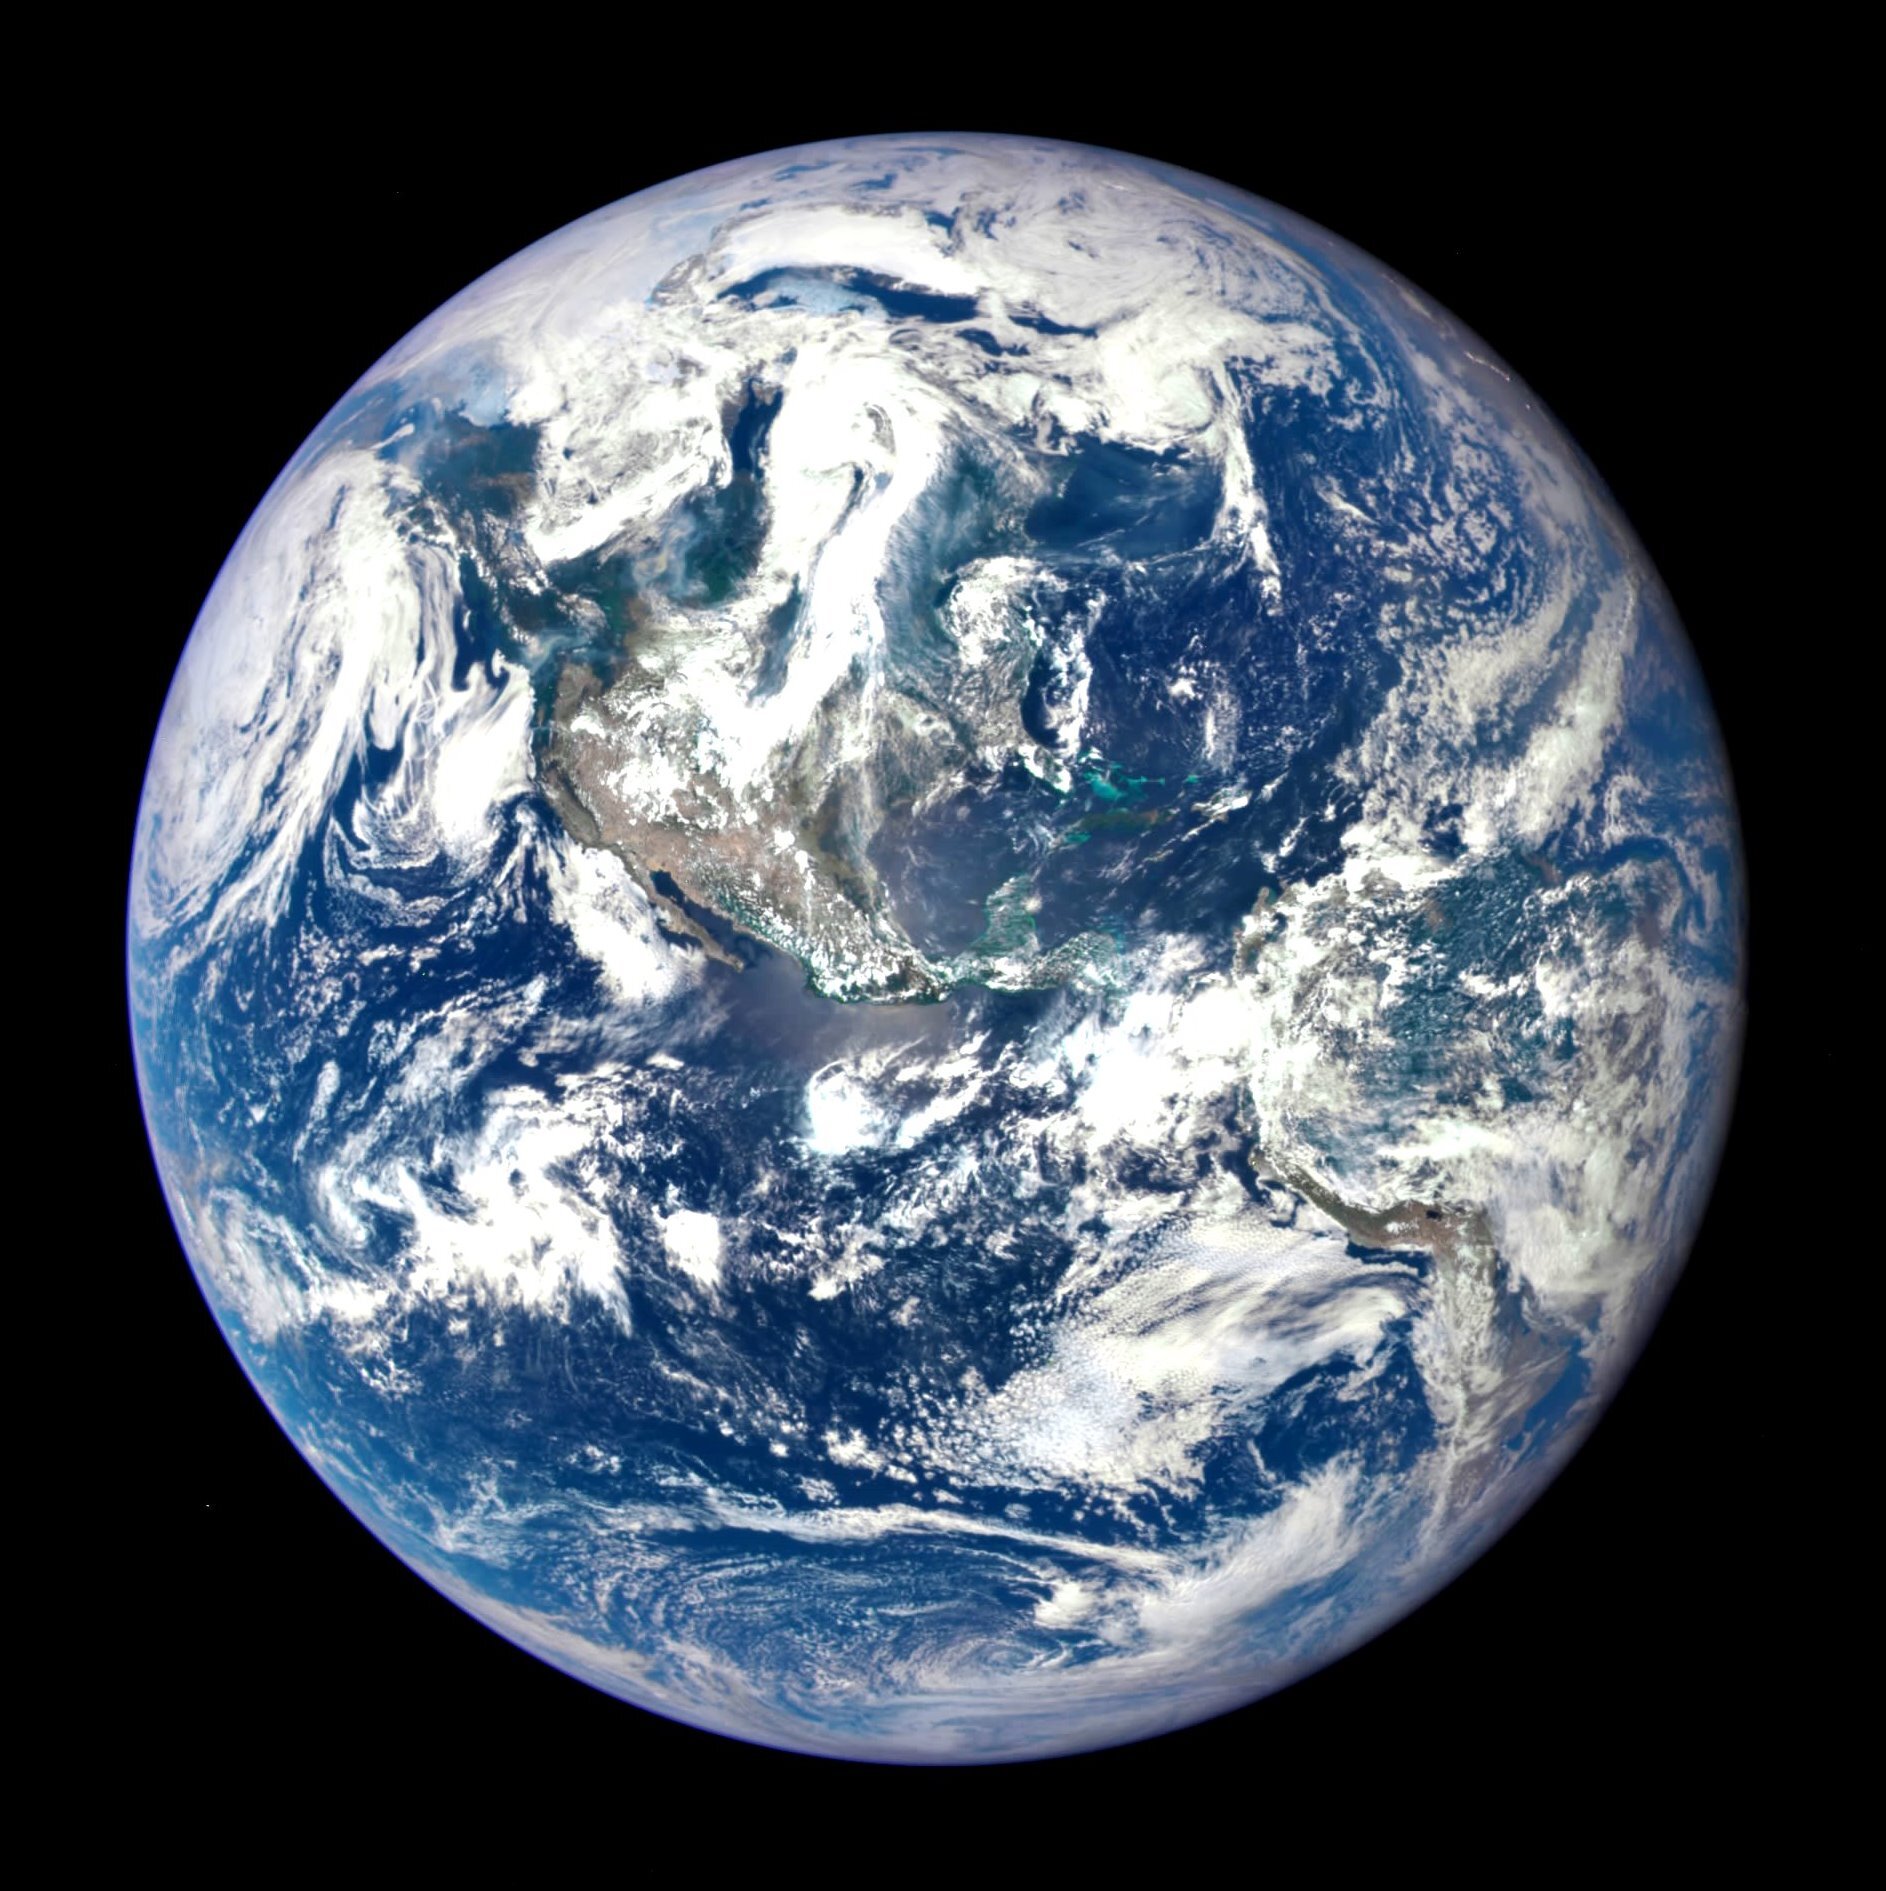 The "Blue Marble"